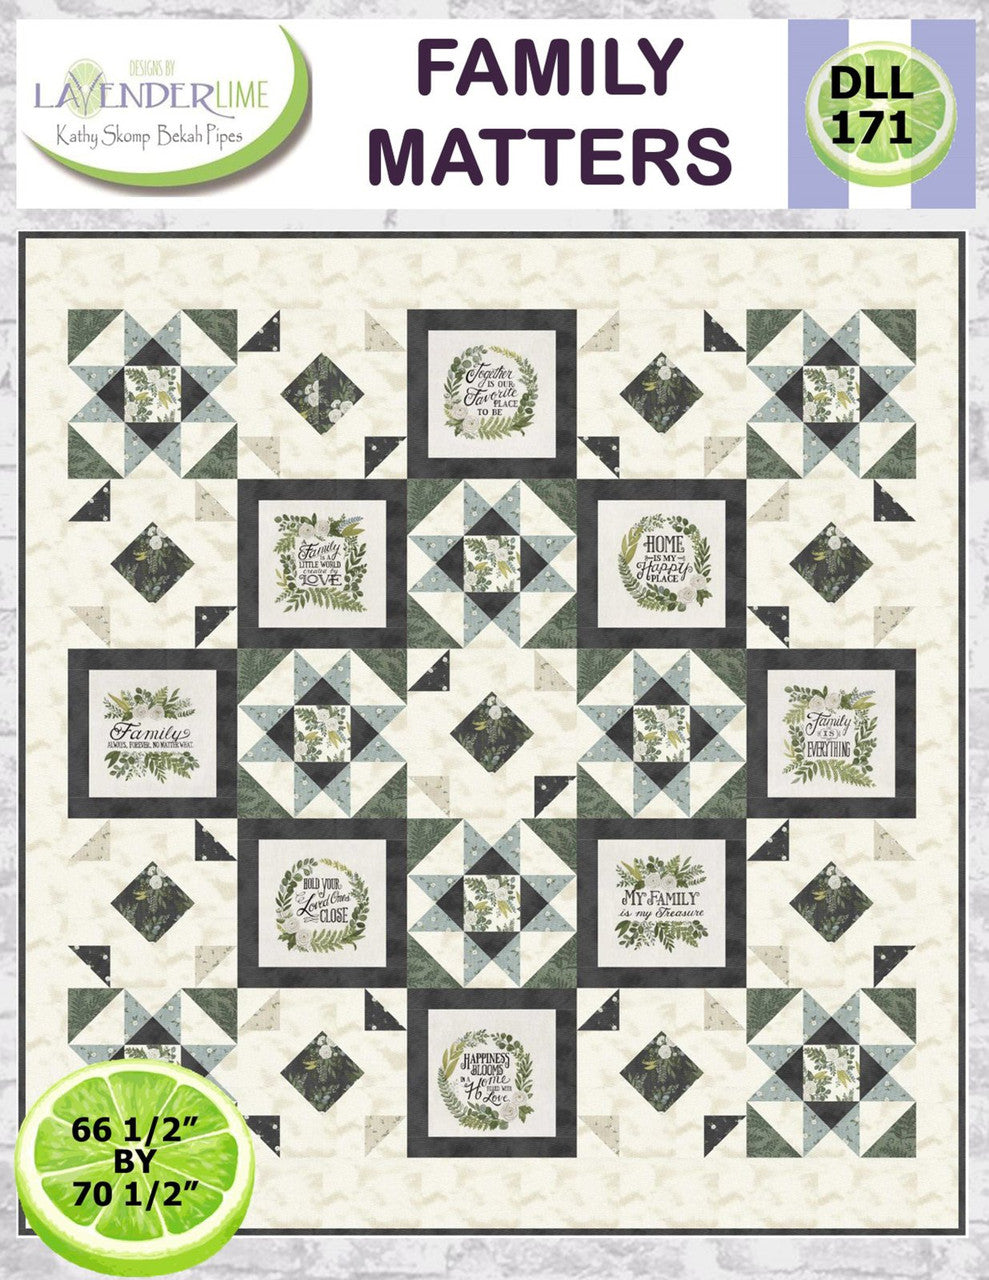 Family Matters Pattern by Lavender Lime - 66.5" x 70.5" - DLL171